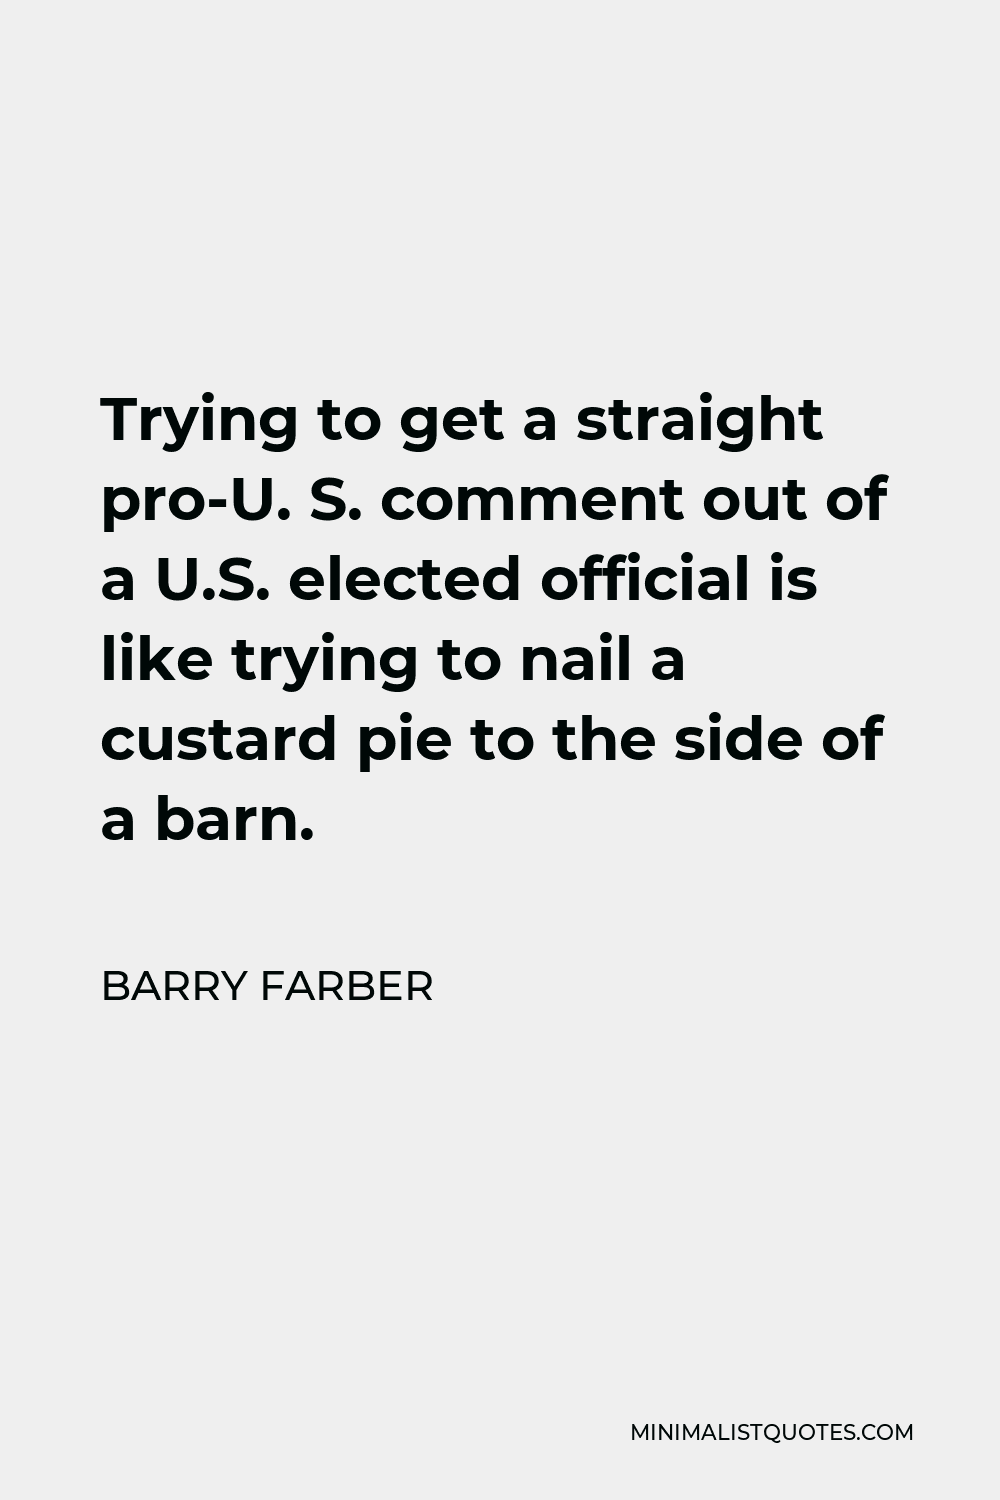 Barry Farber Quote - Trying to get a straight pro-U. S. comment out of a U.S. elected official is like trying to nail a custard pie to the side of a barn.